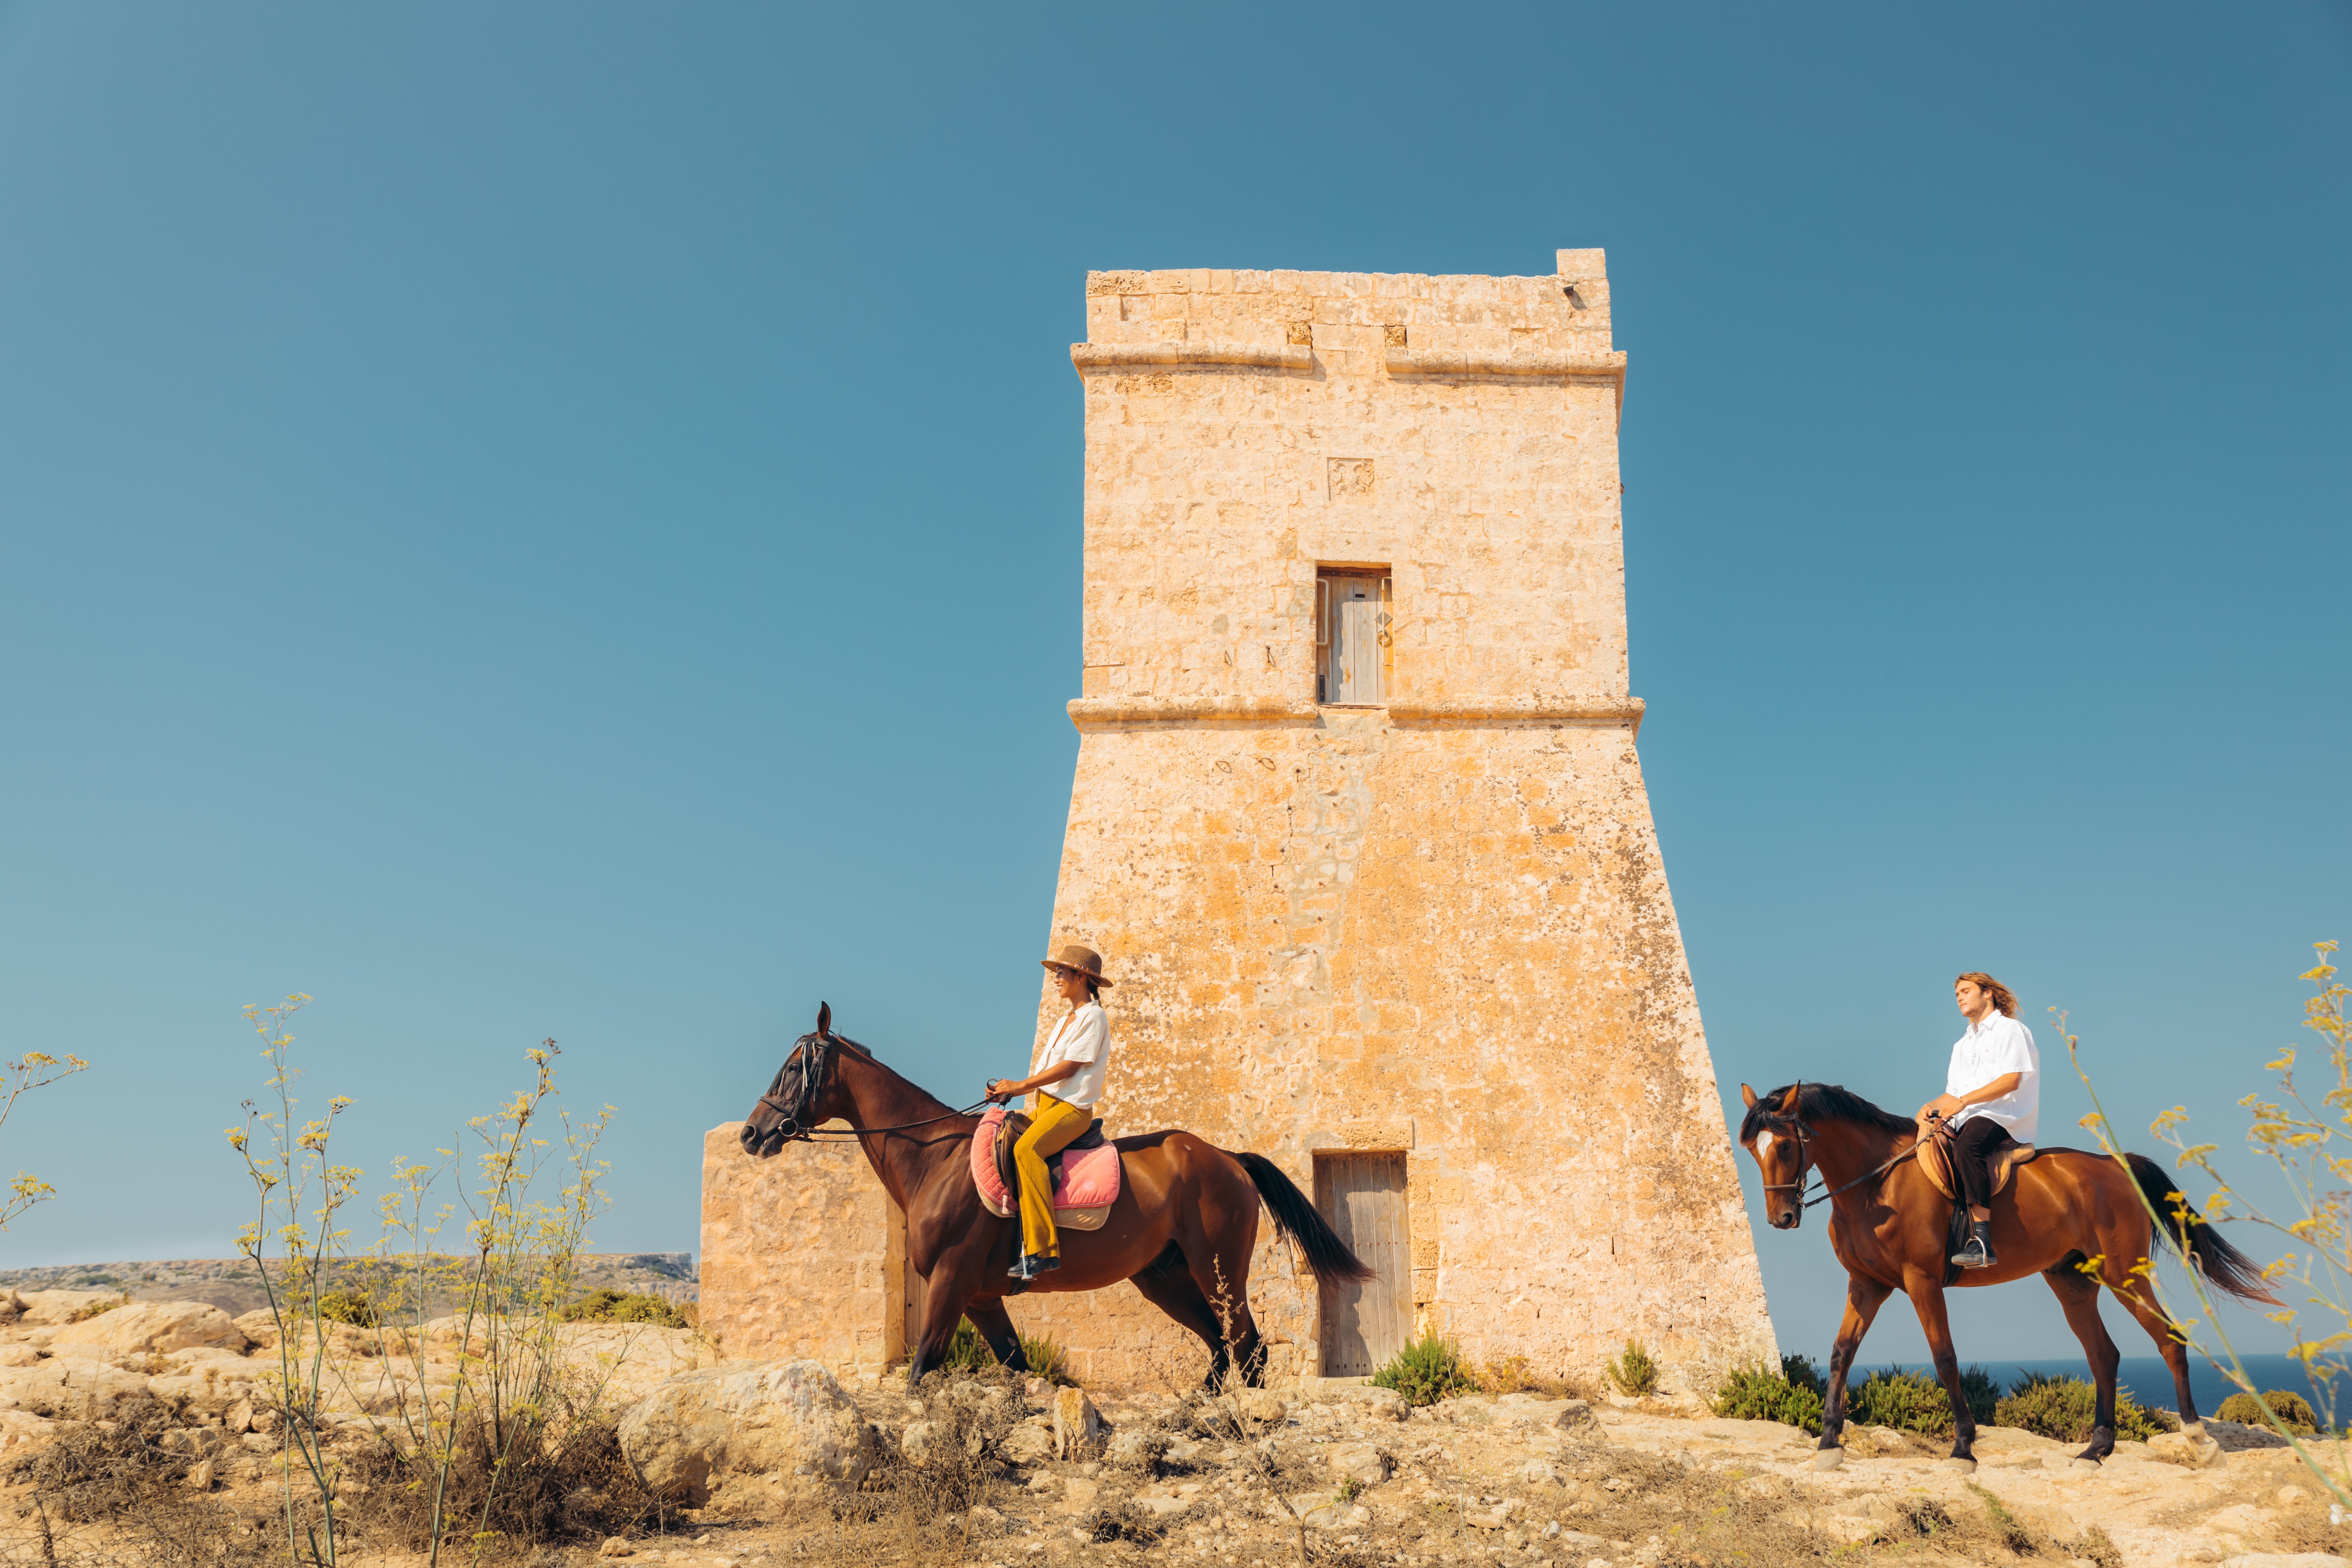 From hiking to horseriding, enjoy natural adventures in Malta